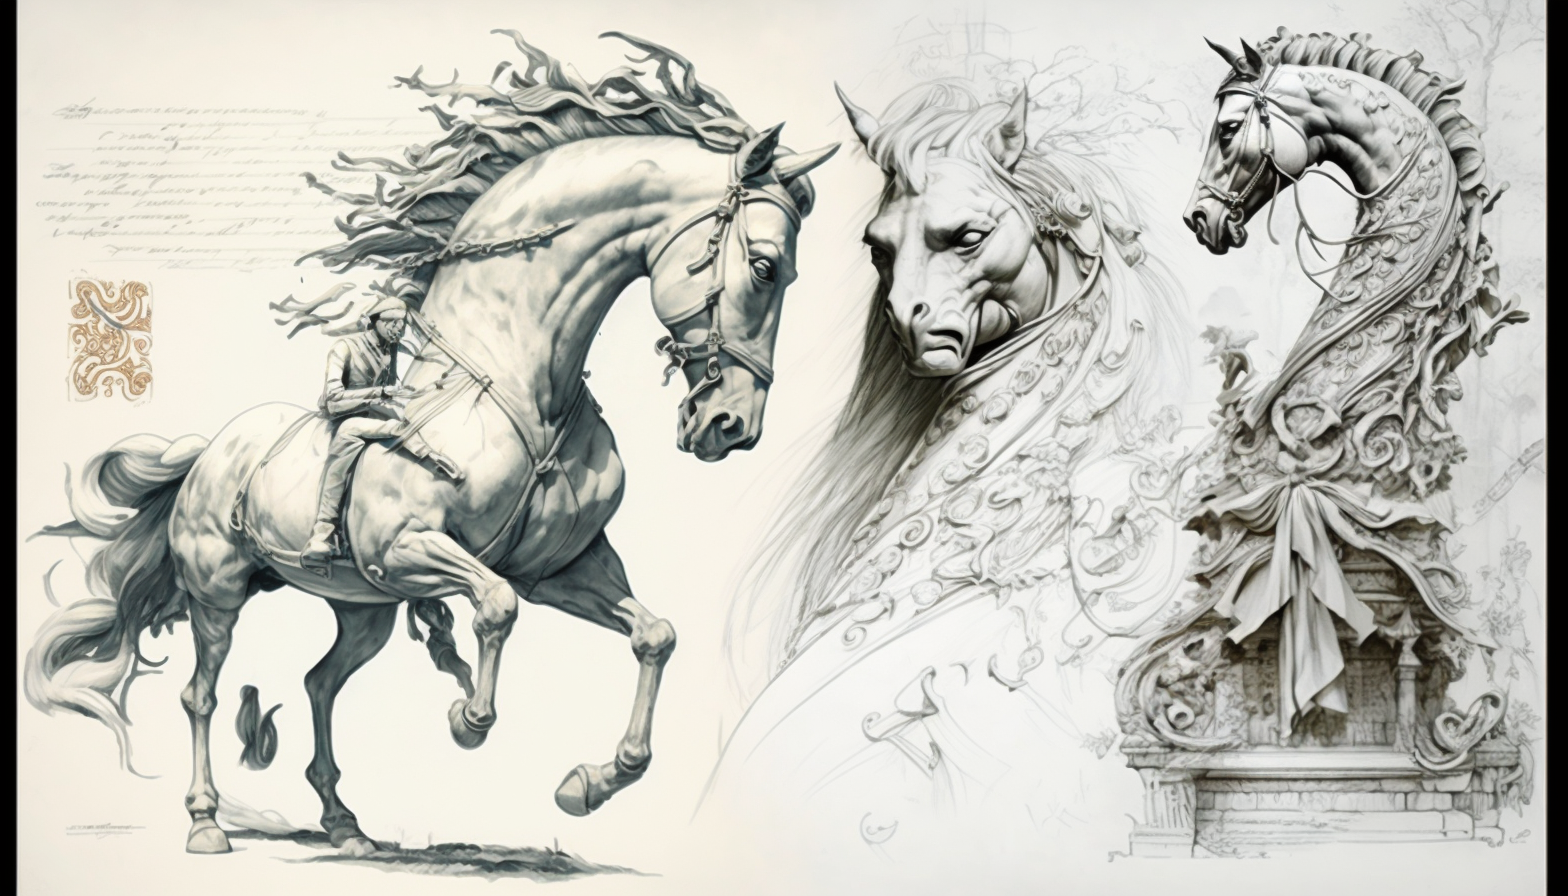 66yyyh_horsesnakeJourney_to_the_Westconcept_design_sheetwhite_b_33218560-53a6-4b.png